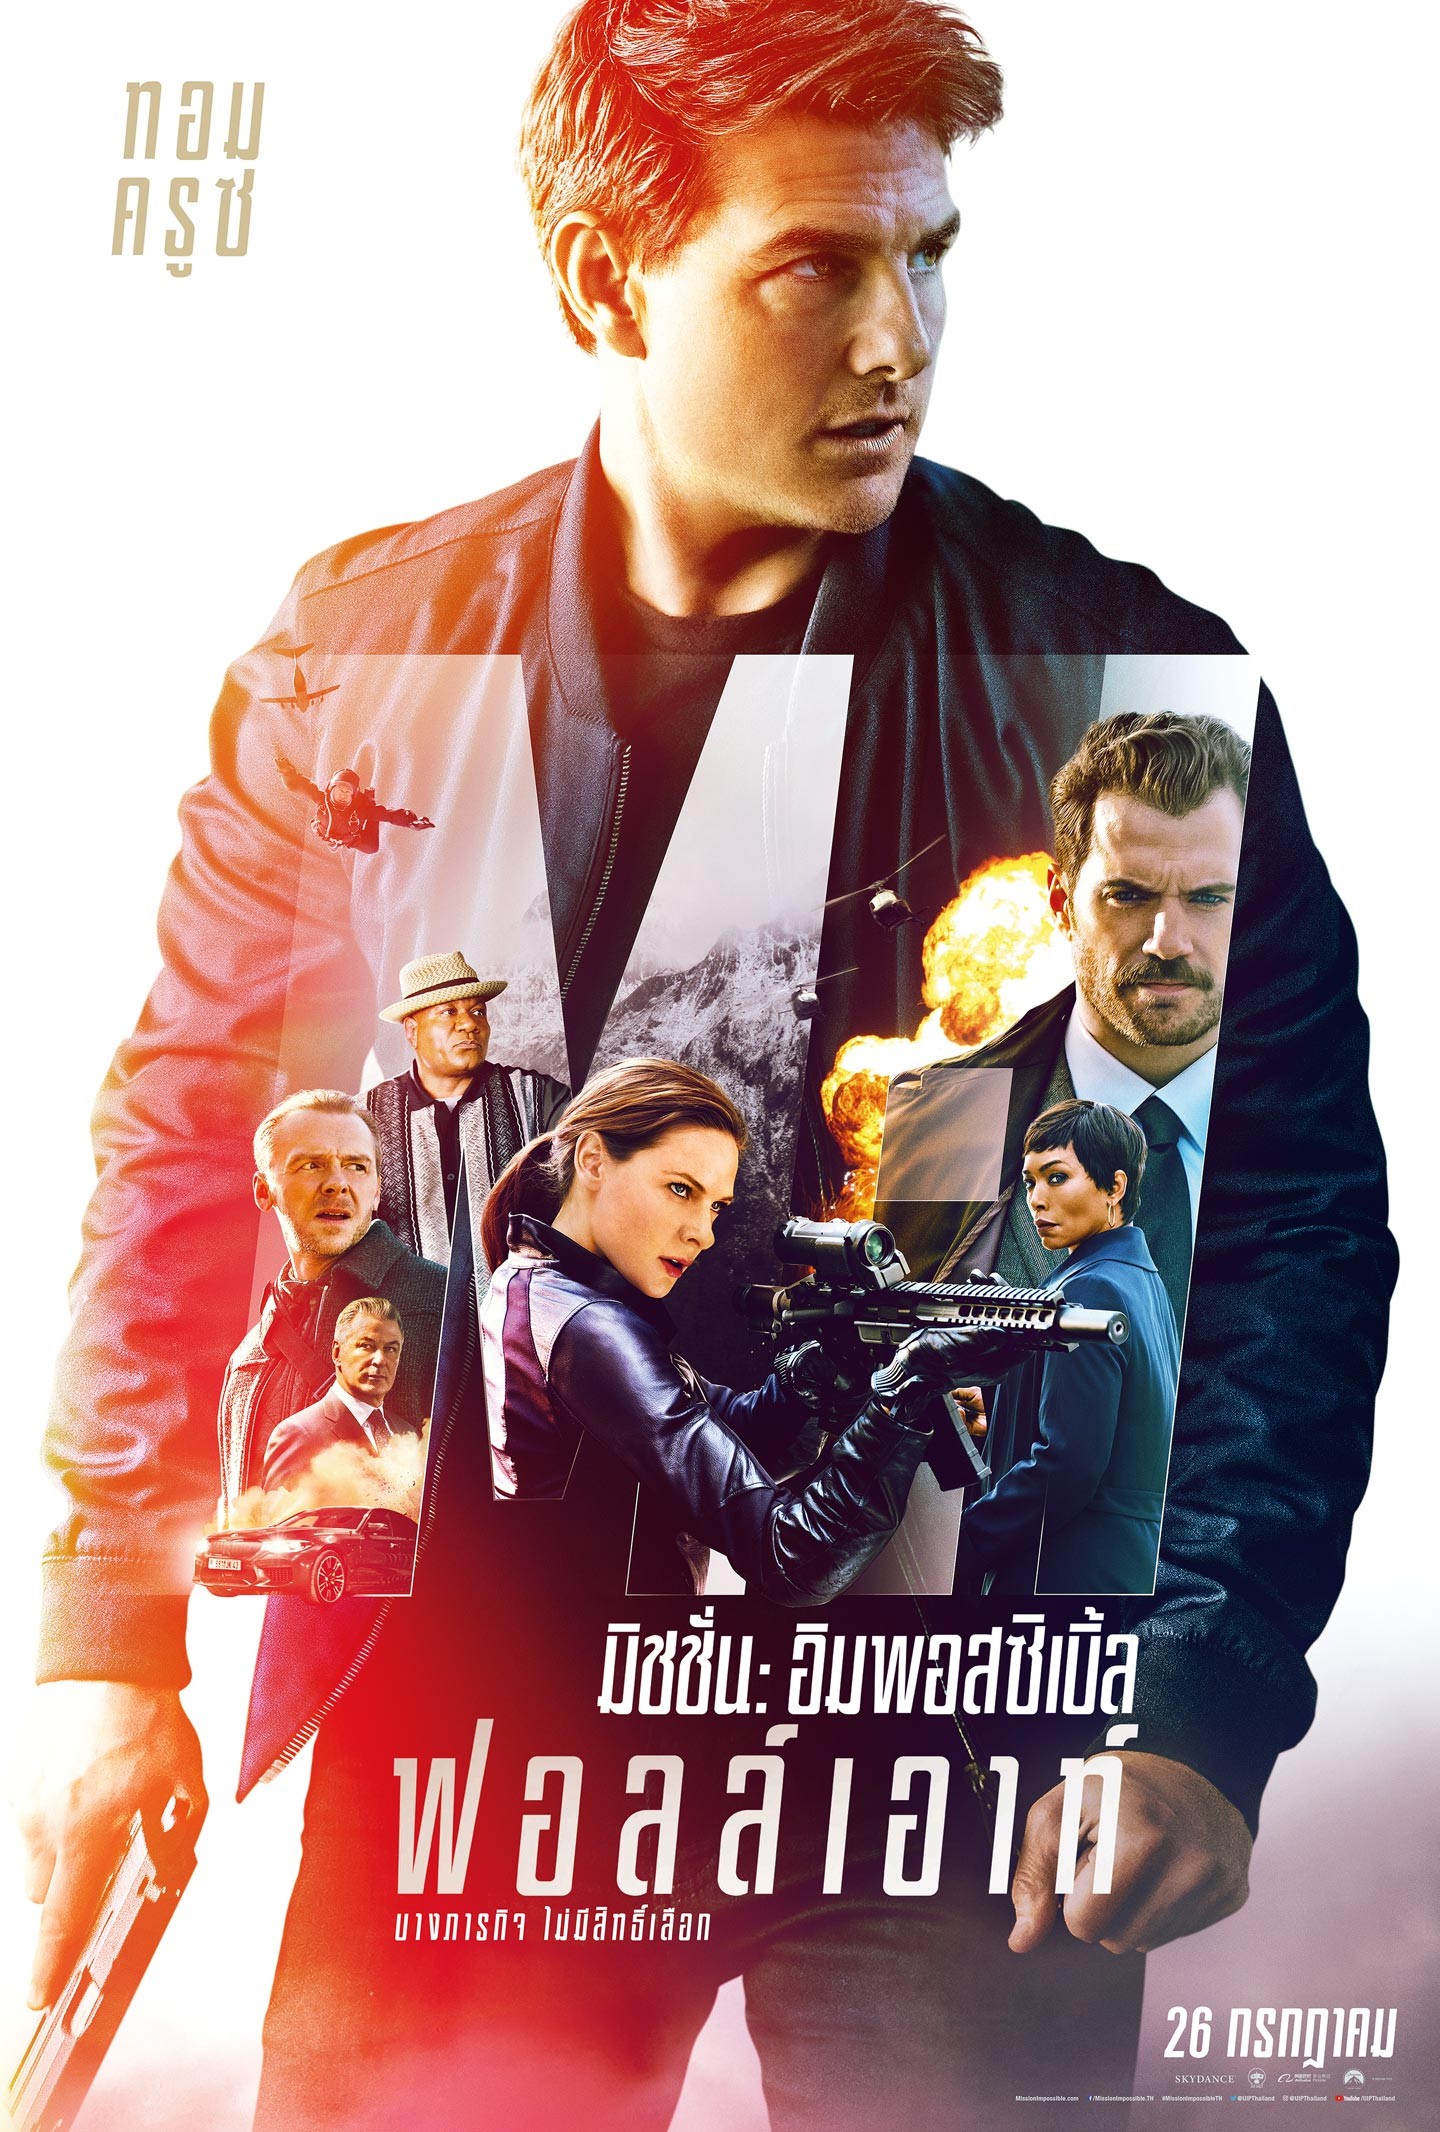 Mission: Impossible 6 -Fallout